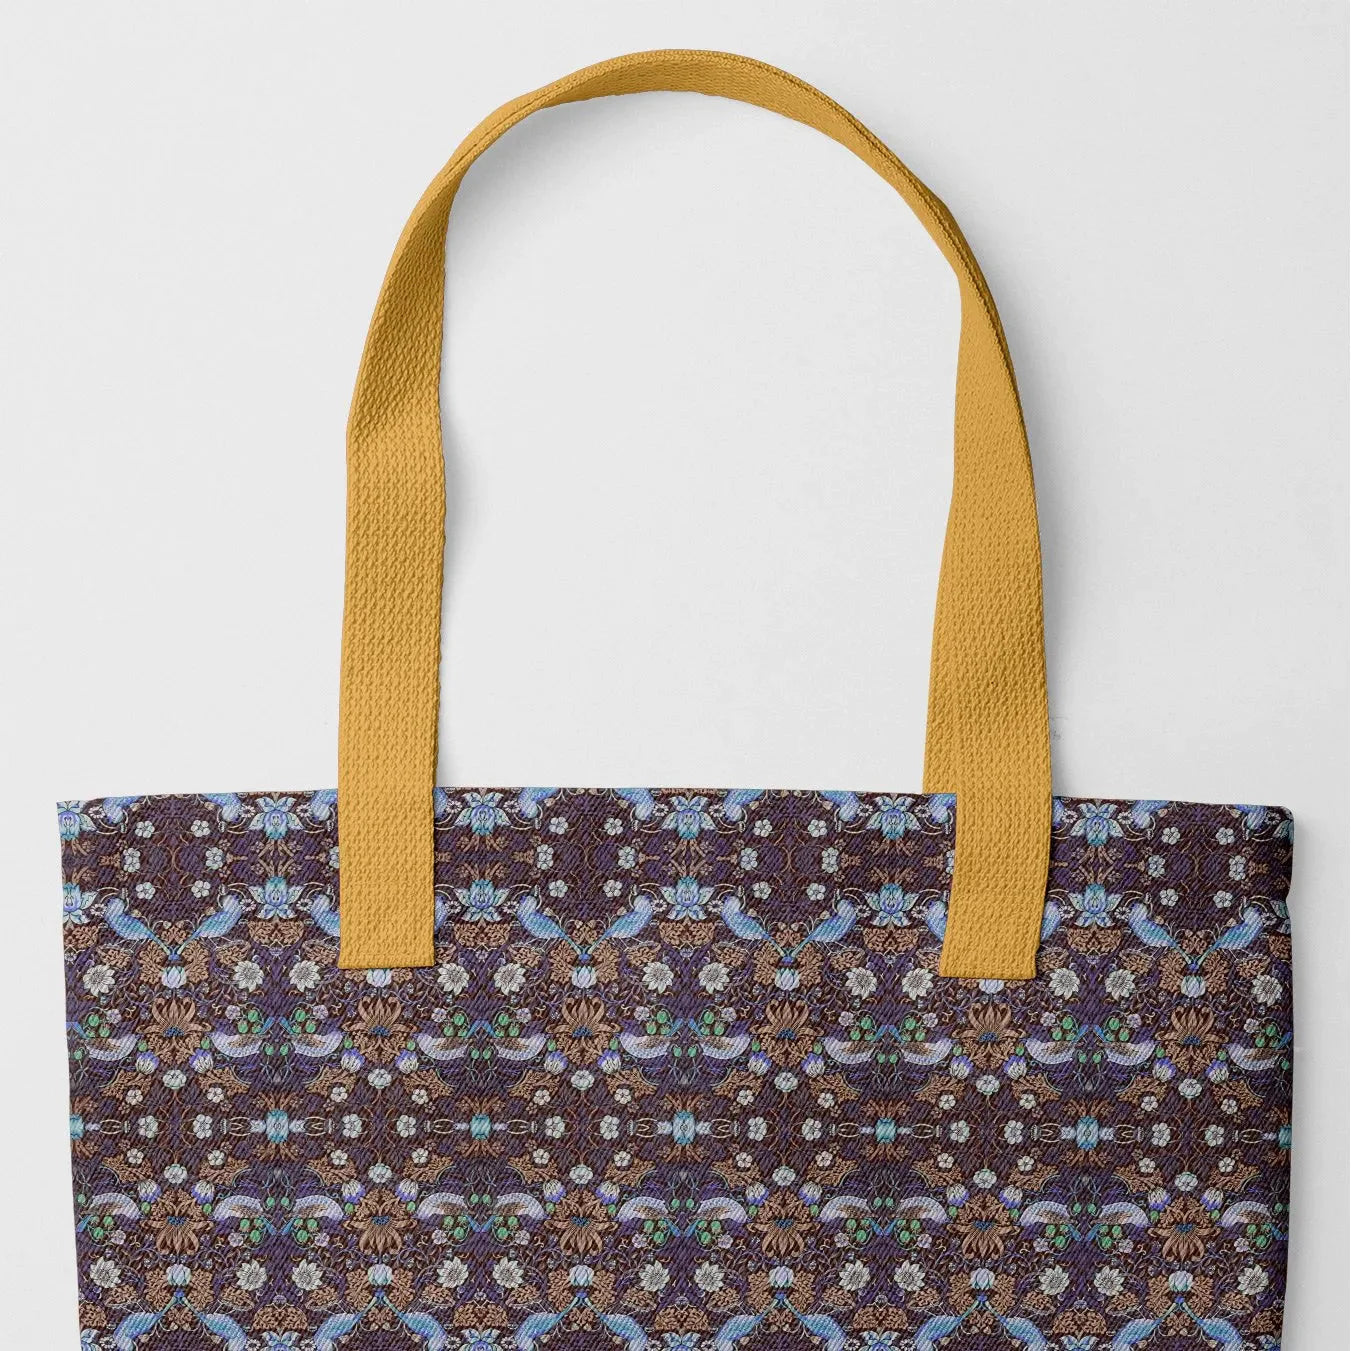 Strawberry Thief Too x 2 Tote - Heavy Duty Reusable Grocery Bag - Yellow Handles - Shopping Totes - Aesthetic Art